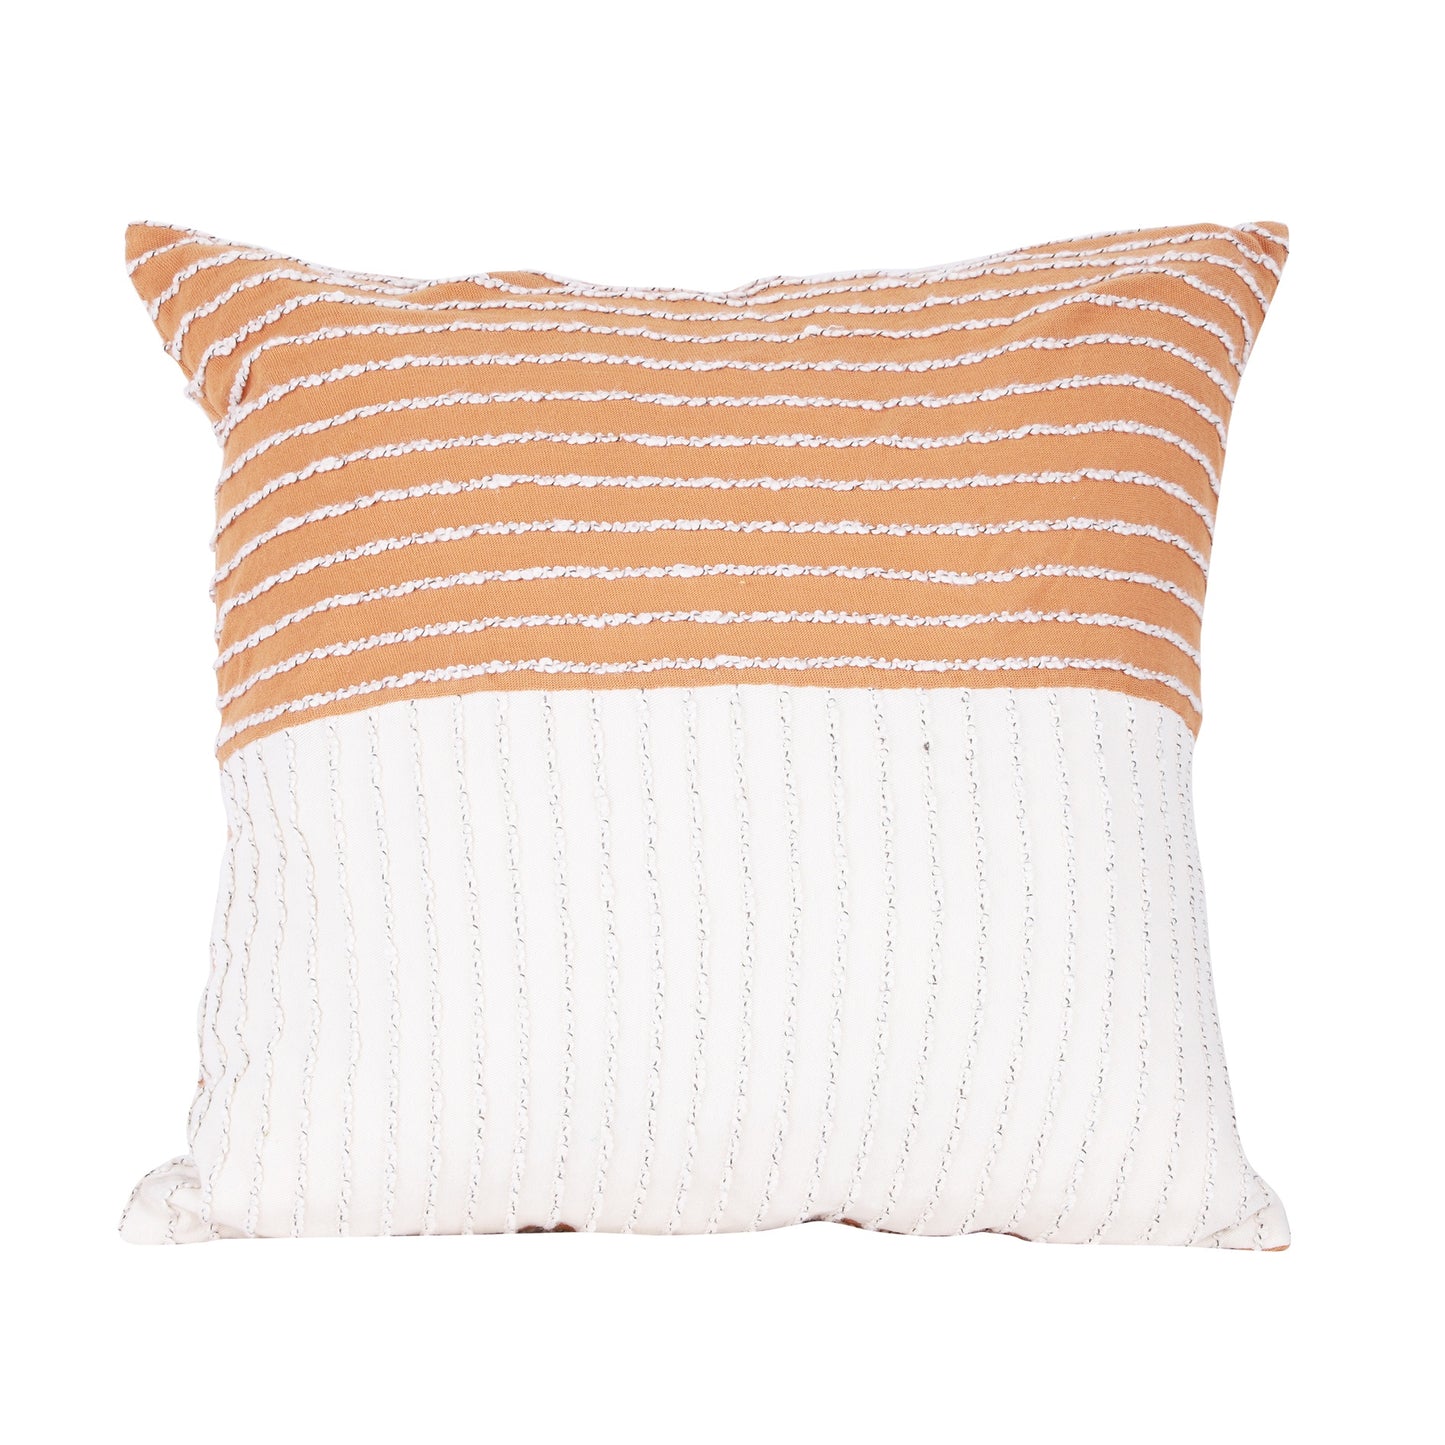 NUEVOSGHAR 100% Cotton Cushion Cover | Interwoven Horizontal Stripe Cushion Cover|Square Cushion for Bedroom,Living Room, Sofa, Office |Home Decorative Cushion | 18x18 Inch_ Ivory/Mustard